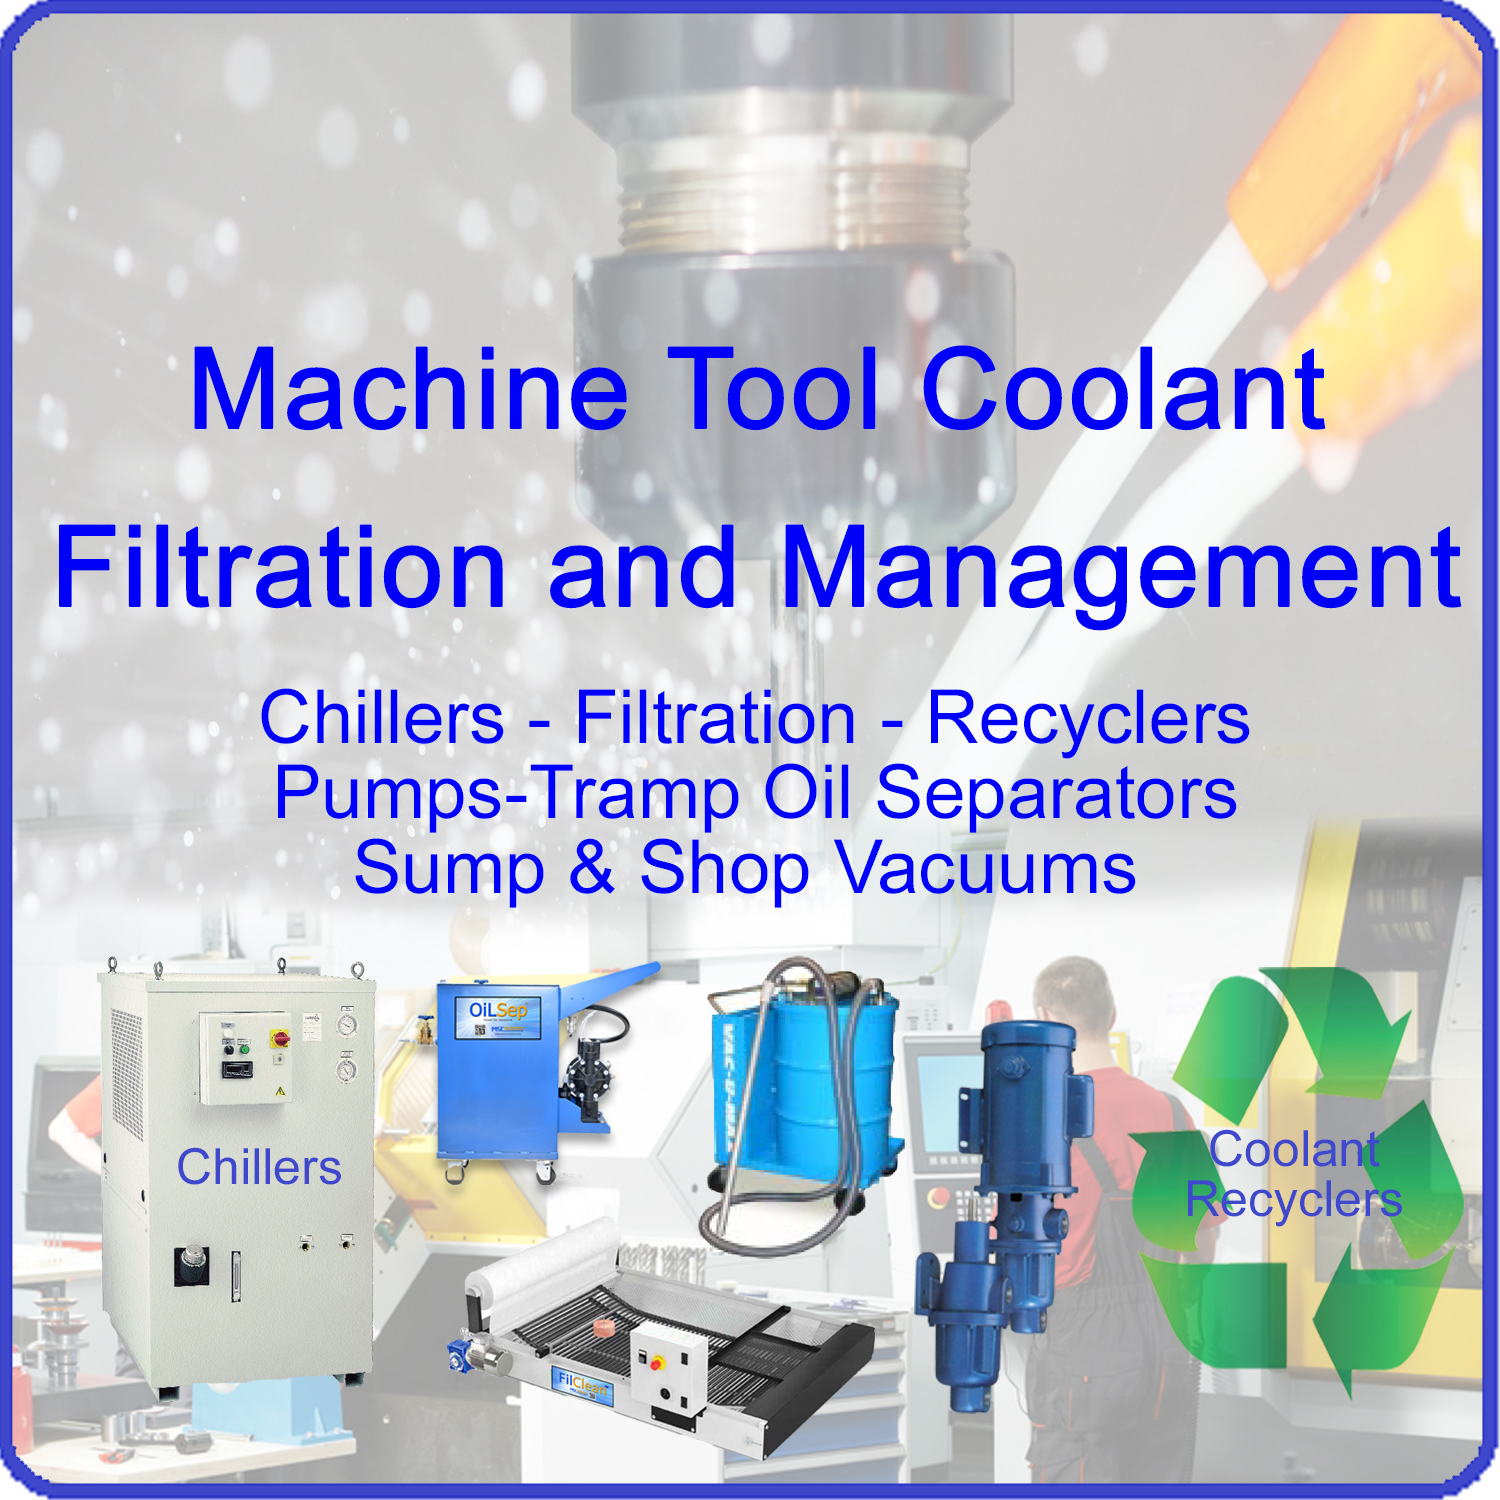 Machine Tool Coolant Filtration Systems